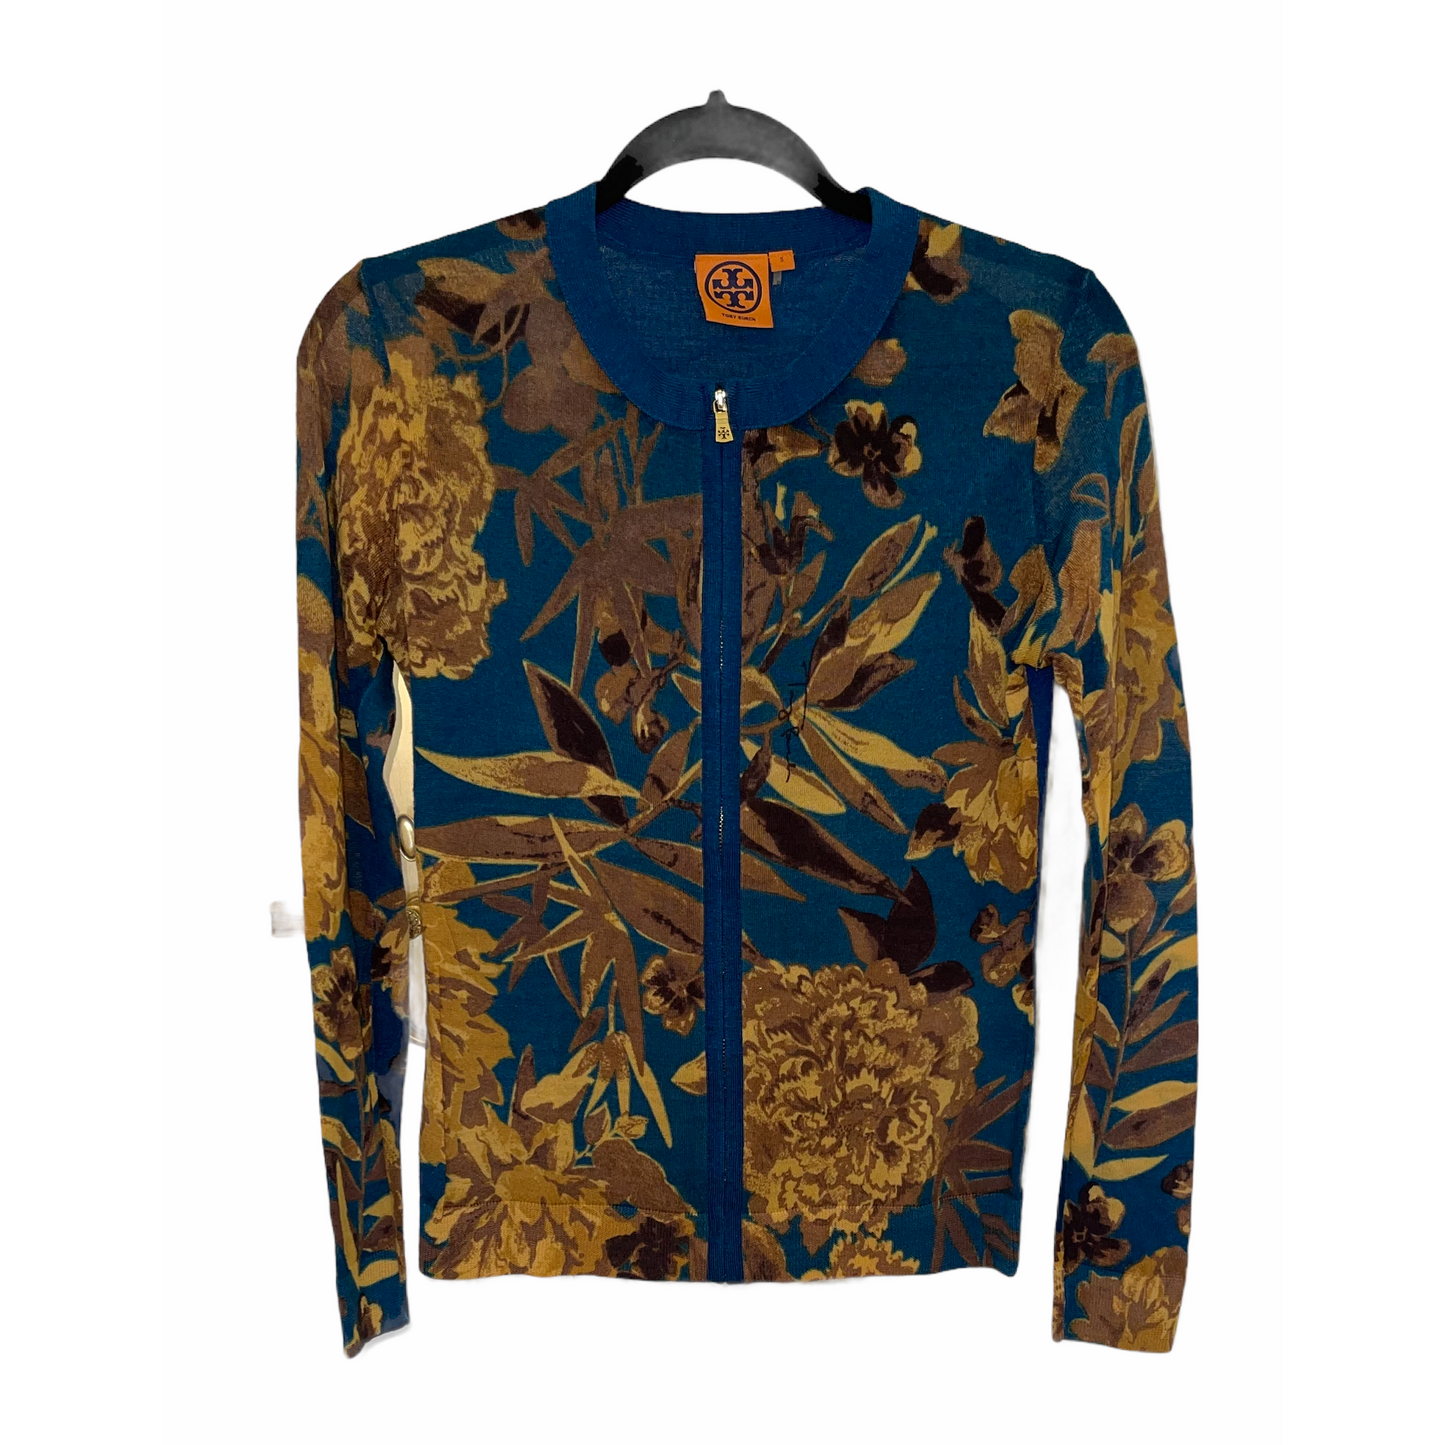 Cardigan-Blue & Brown Floral Zip Up Design- Wool Material By Tory Burch